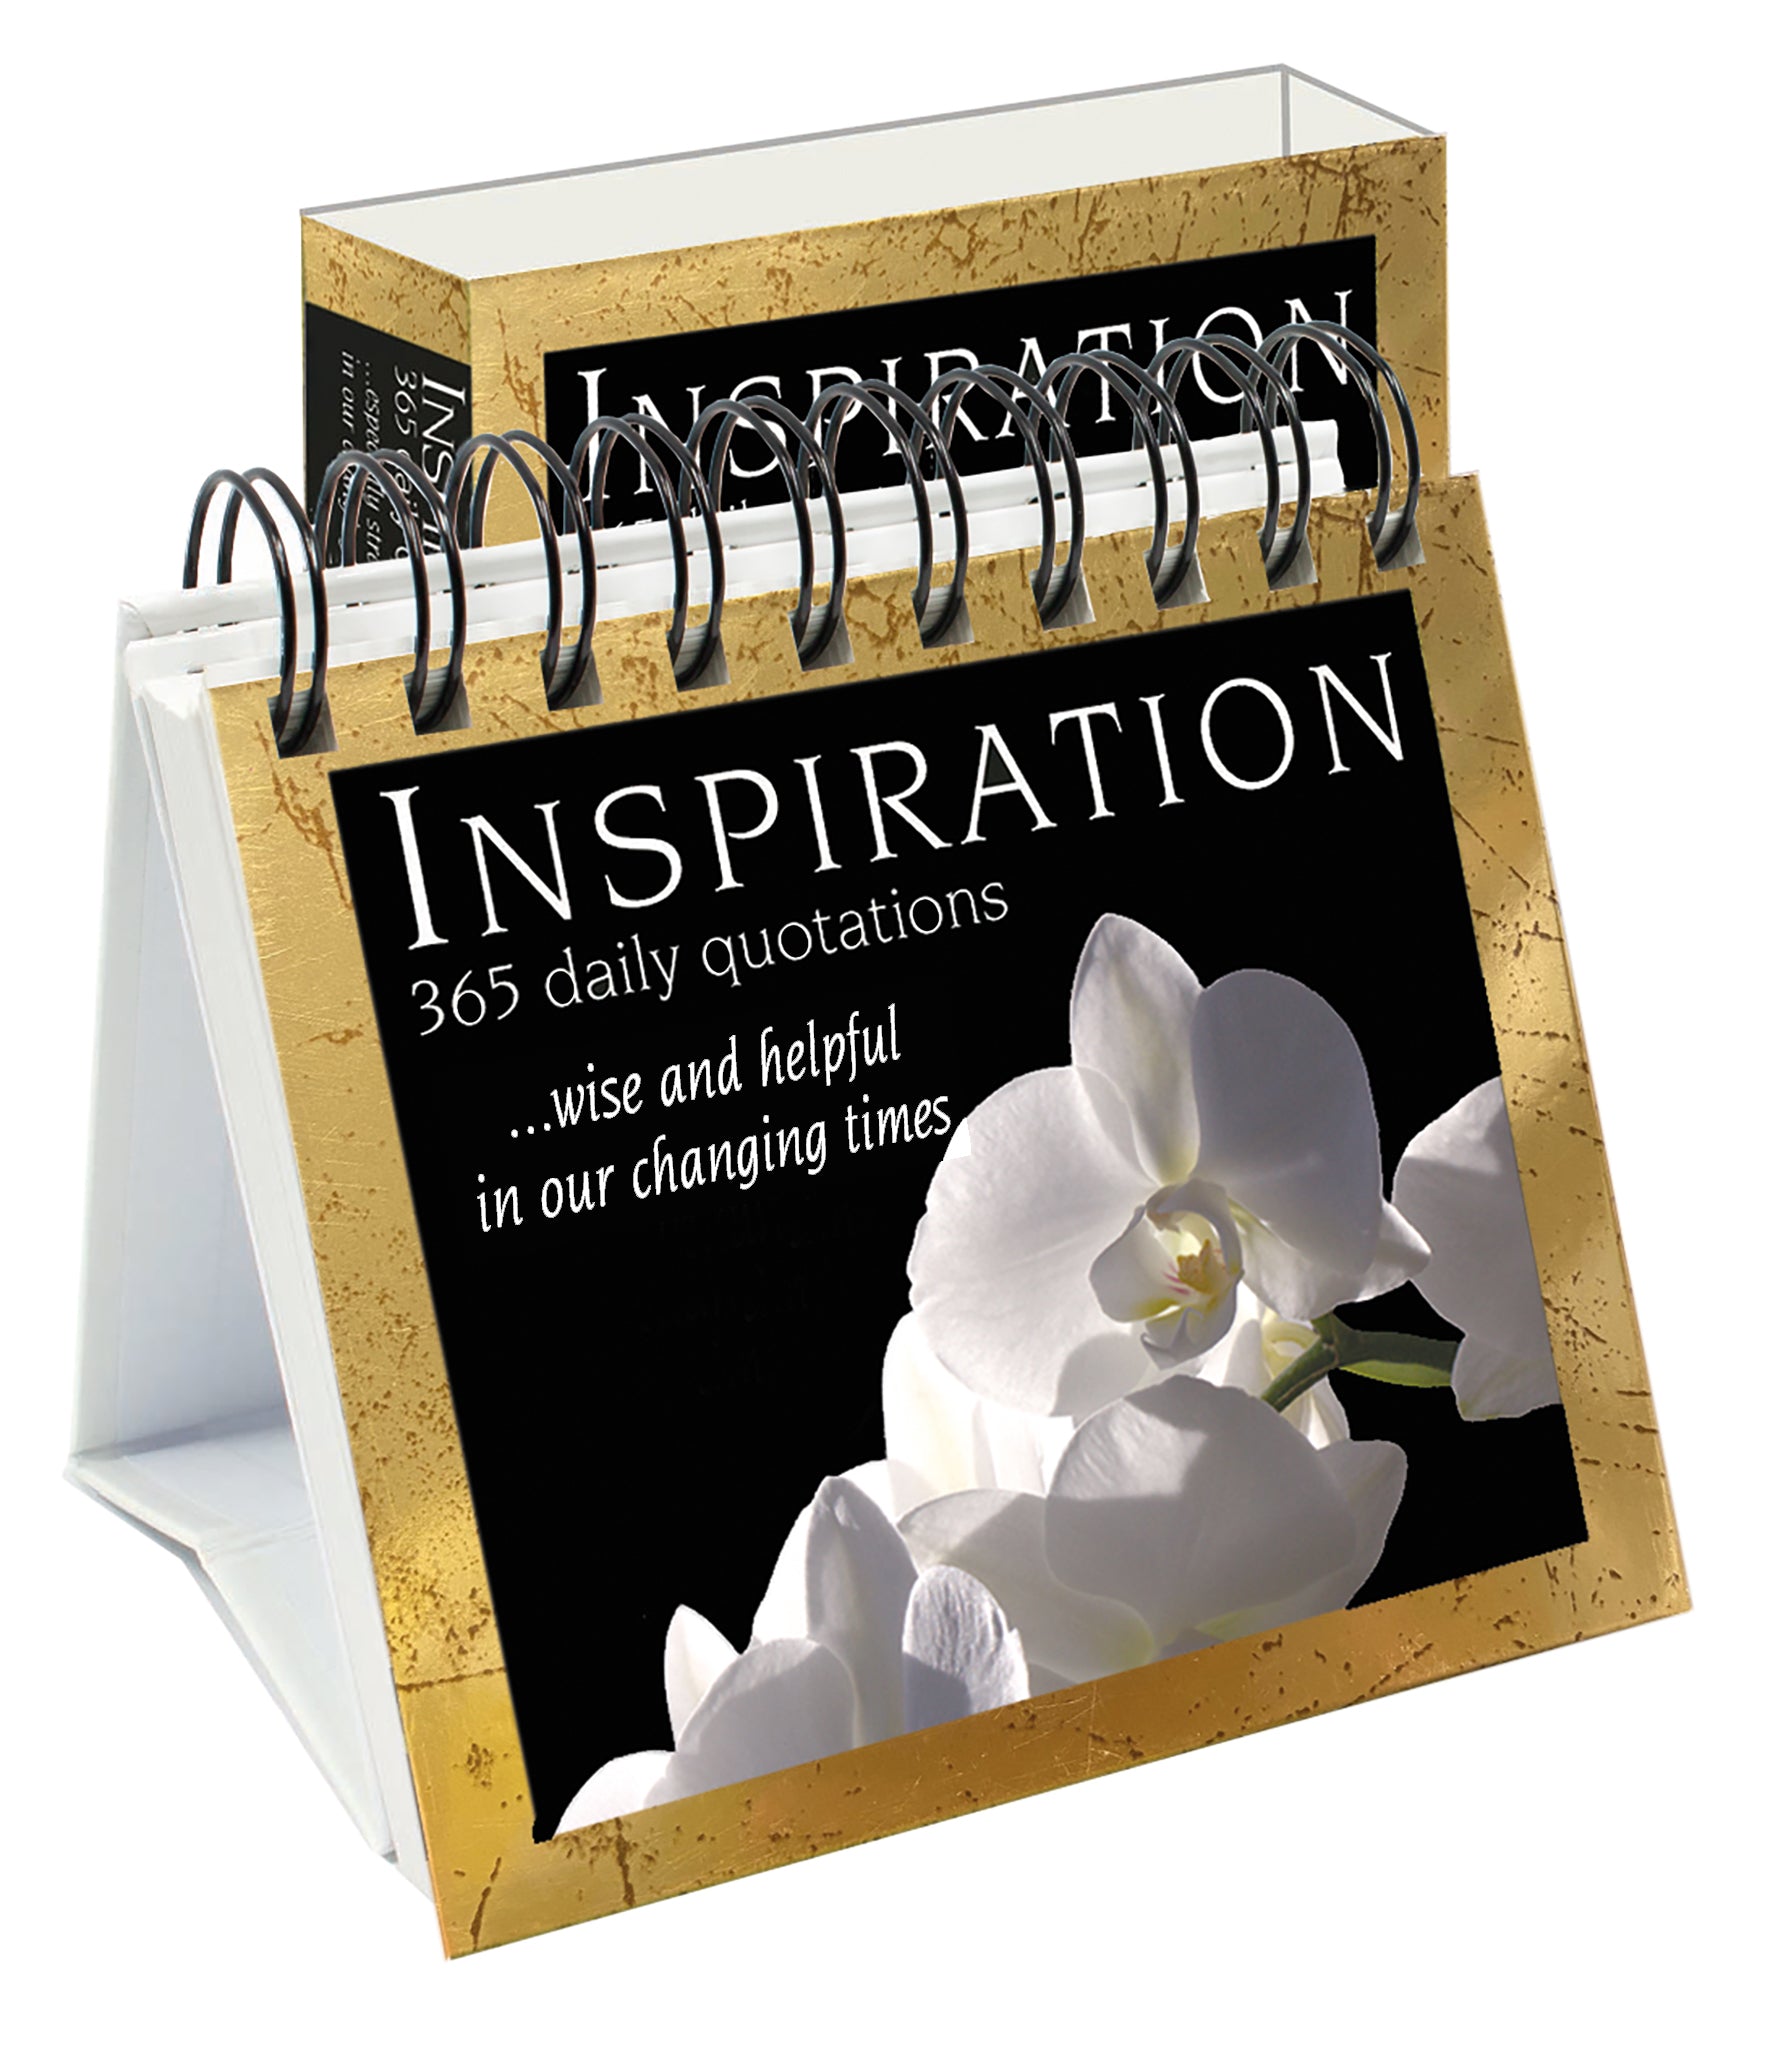 365 Inspiration - wise and helpful in our changing times